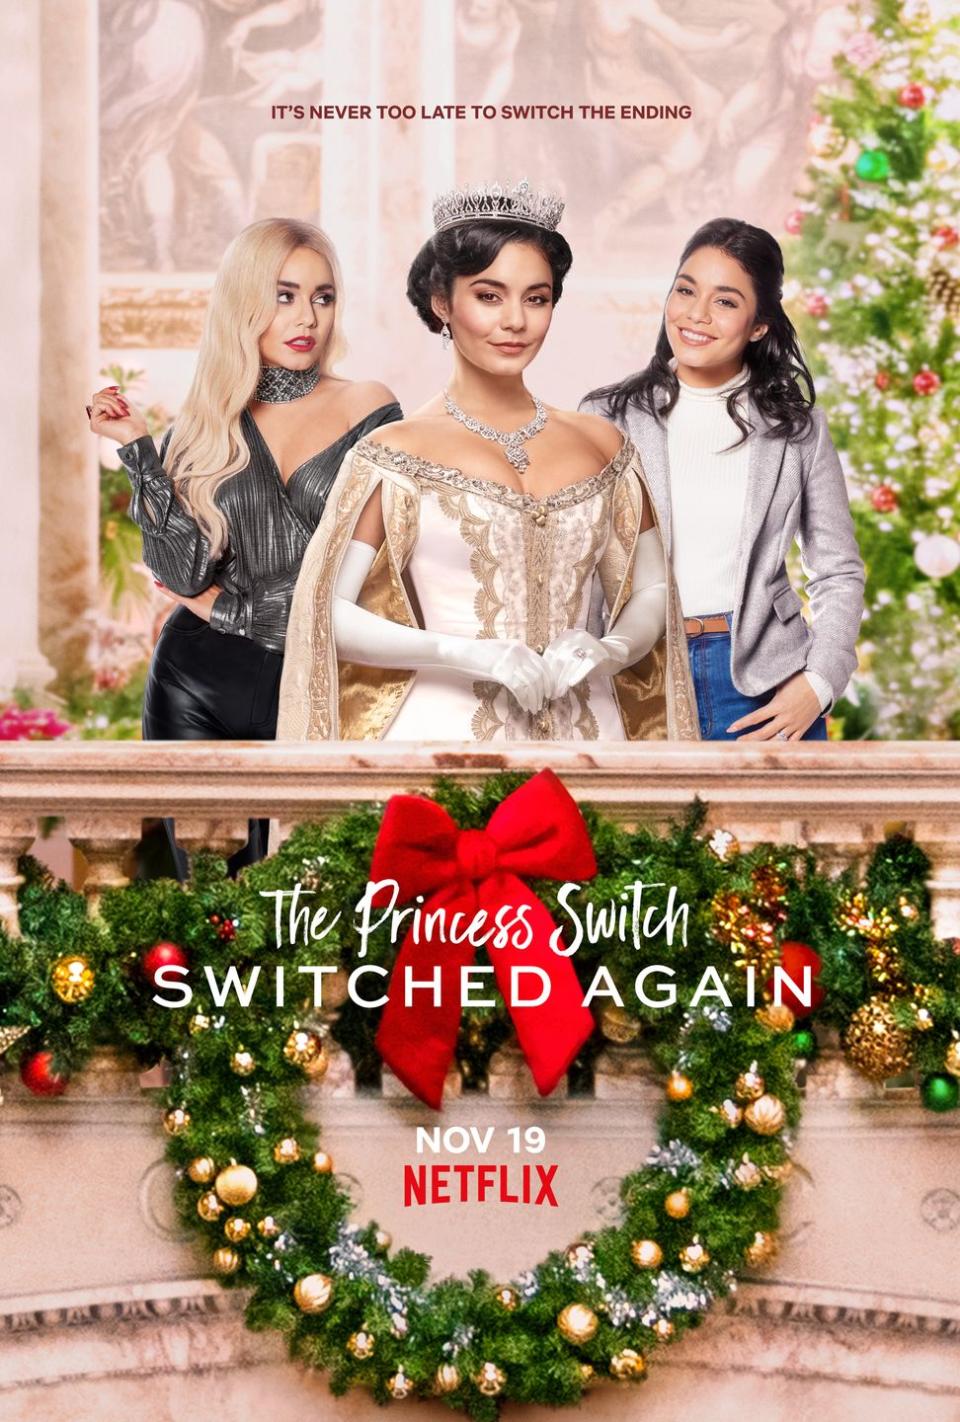 <p>Is it even Christmas if Vanessa Hudgens isn’t getting mistaken for the queen of a small country or a scheming cousin trying to ruin the holiday season? In the third installment of this Netflix original movie series, Queen Margaret and Princess Stacey (both played by Vanessa Hudgens) must enlist the help of cousin Fiona (also played by Vanessa Hudgens) when a priceless royal relic is stolen.</p><p>But will a dashing, mysterious man from her past help Fiona reform her selfish ways? And will there be the introduction of a fourth character <em>also </em>played by Vanessa Hudgens? You’ll just have to wait until this winter to find out. </p><p><strong>Premiering Winter 2021</strong></p>